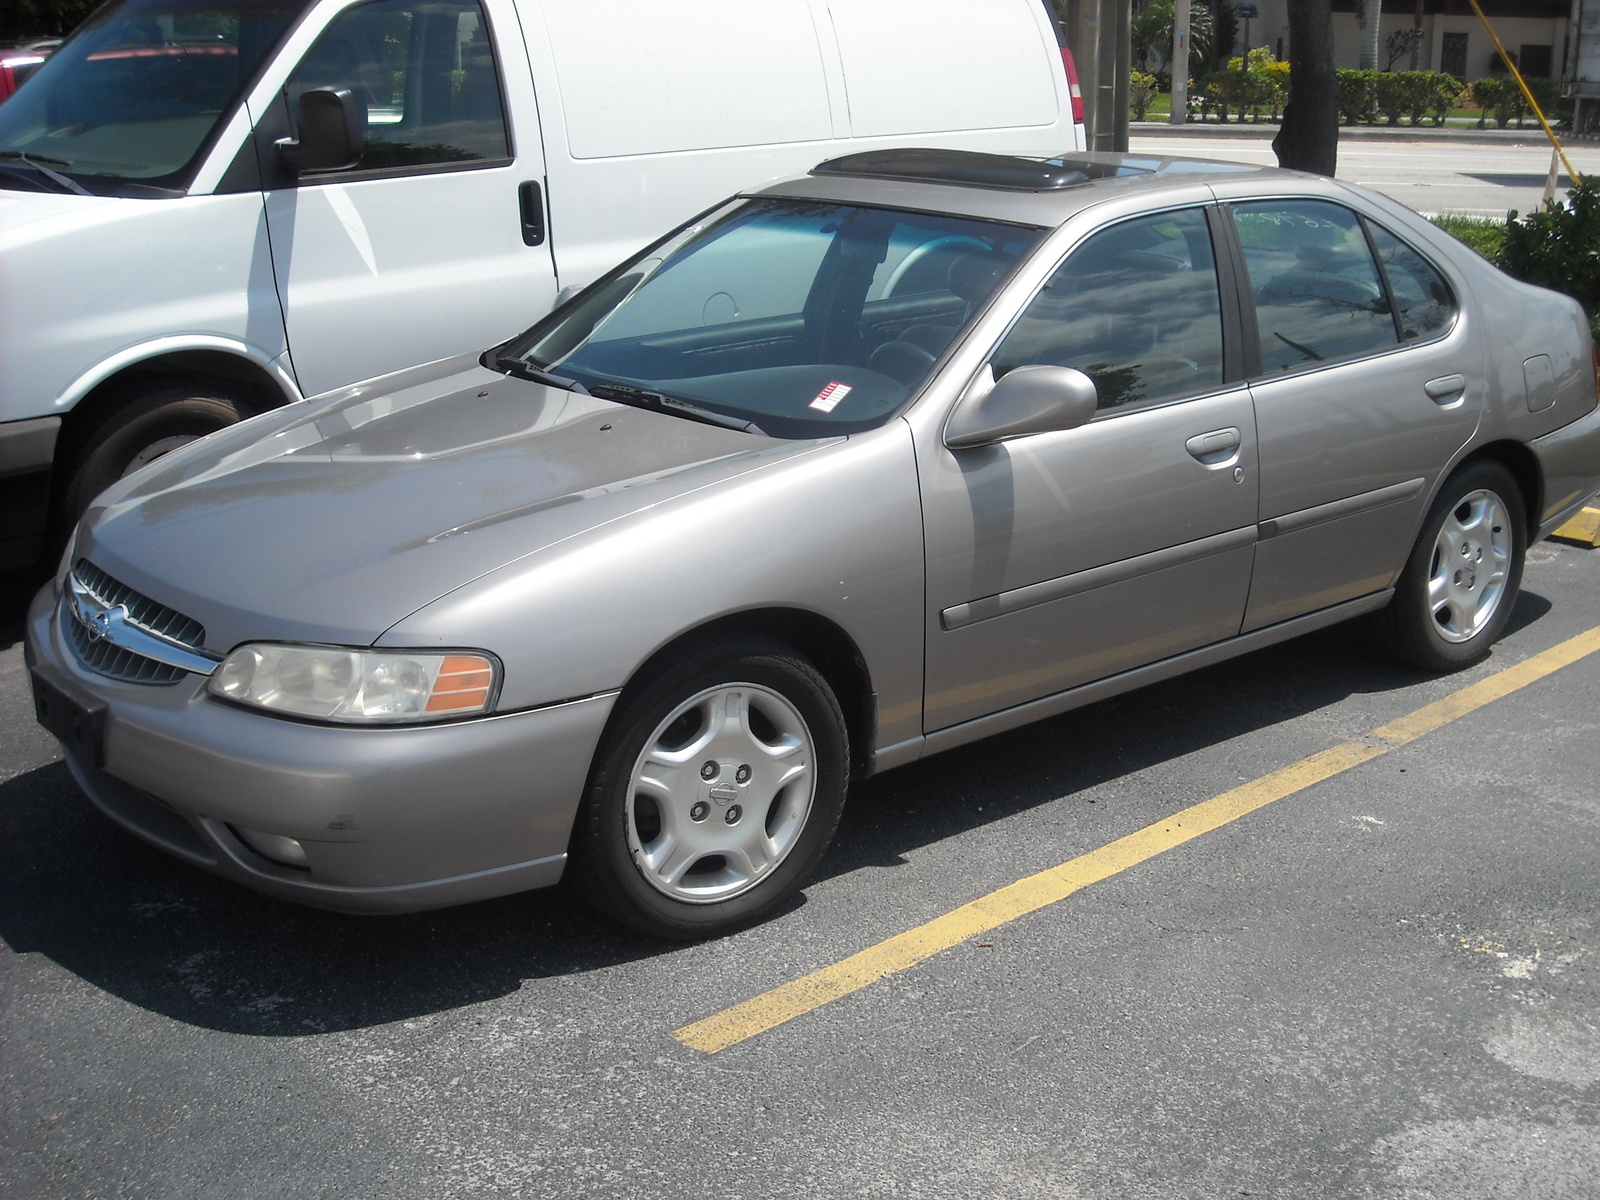 2001 Nissan altima gxe owners manual #4